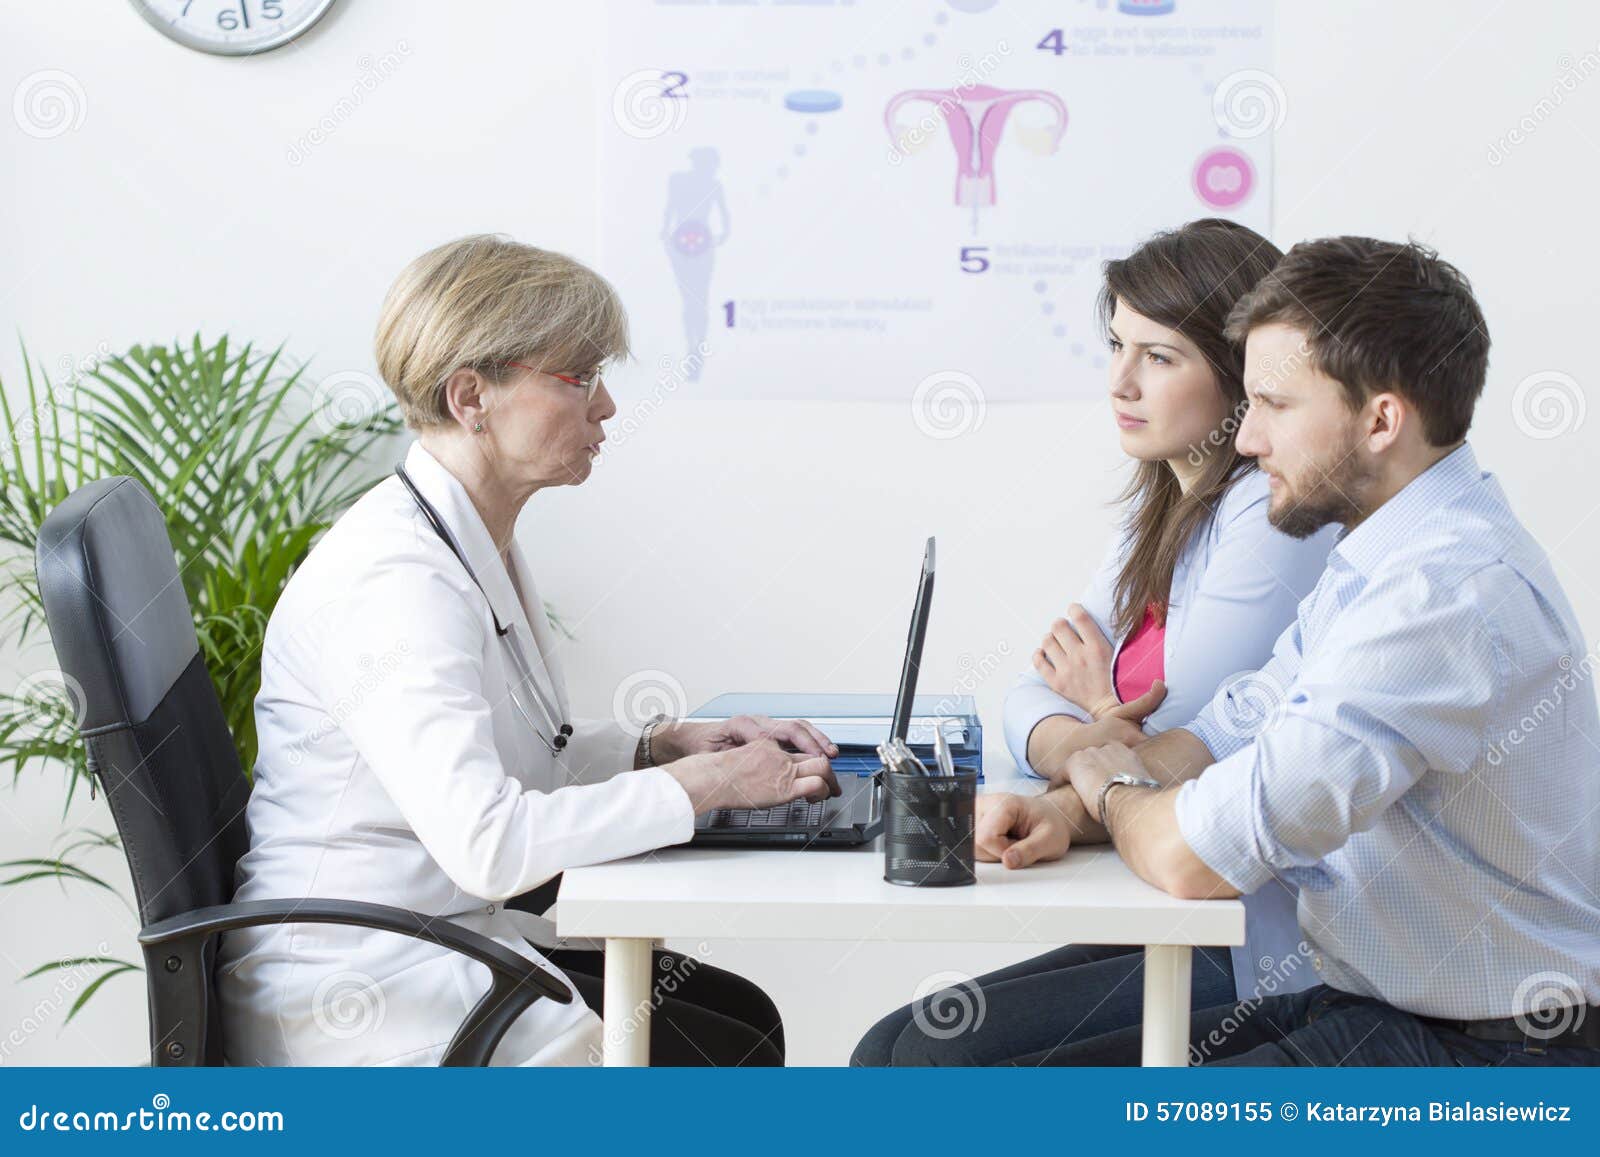 young couple visiting a gynecologist